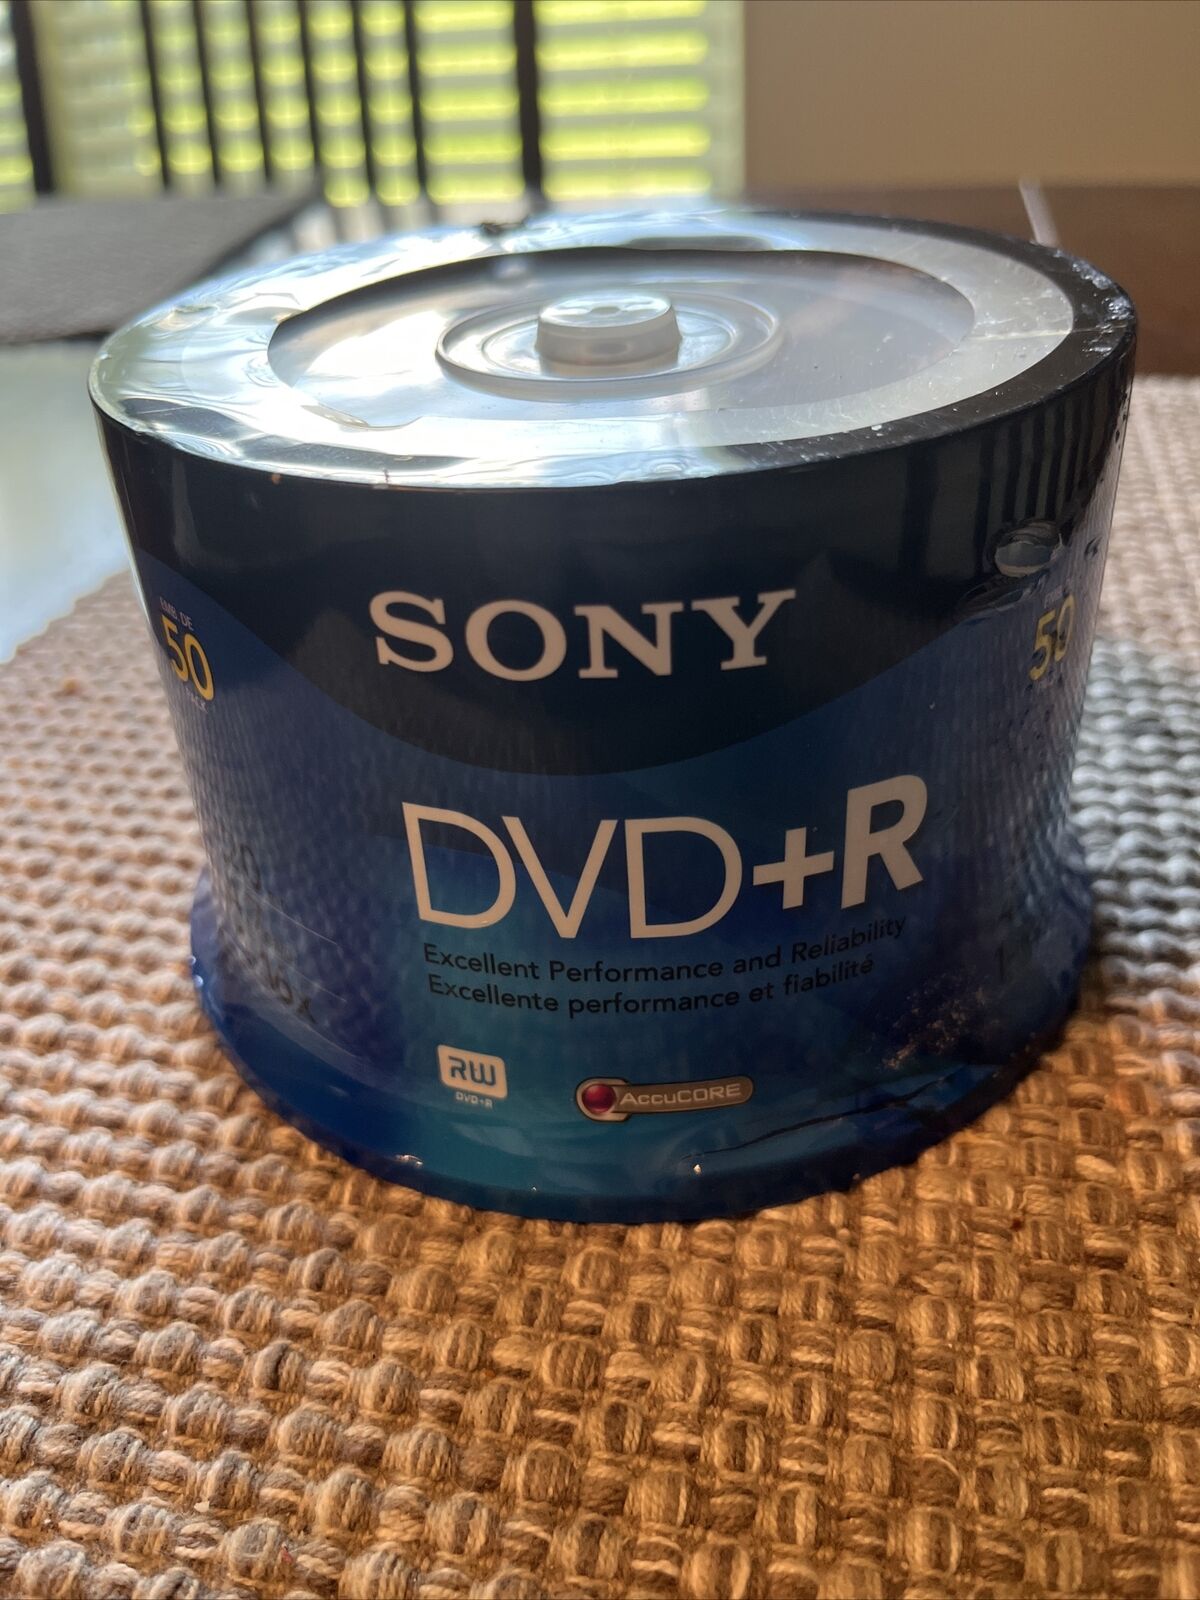 Sony DVD+R SEALED 50-Pack Blank Media 4.7GB -120 min 16x Accucore